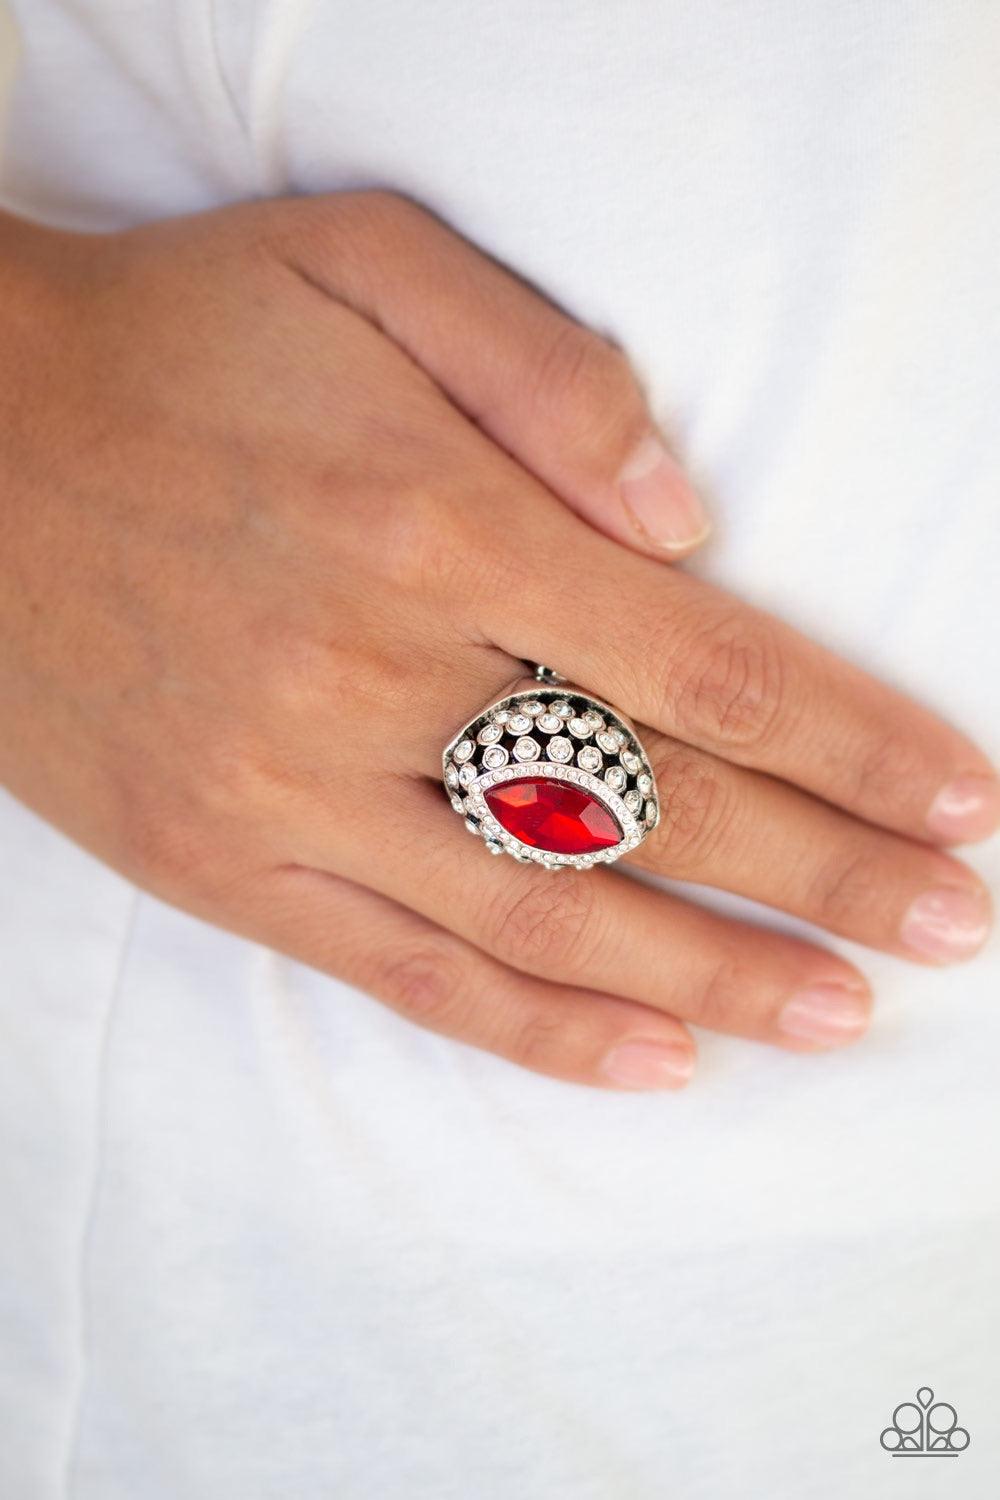 Paparazzi Accessories Royal Radiance - Red Featuring a regal marquise style cut, a fiery red rhinestone is pressed into the center of a silver frame radiating with glittery white rhinestones for a blinding finish. Features a stretchy band for a flexible f